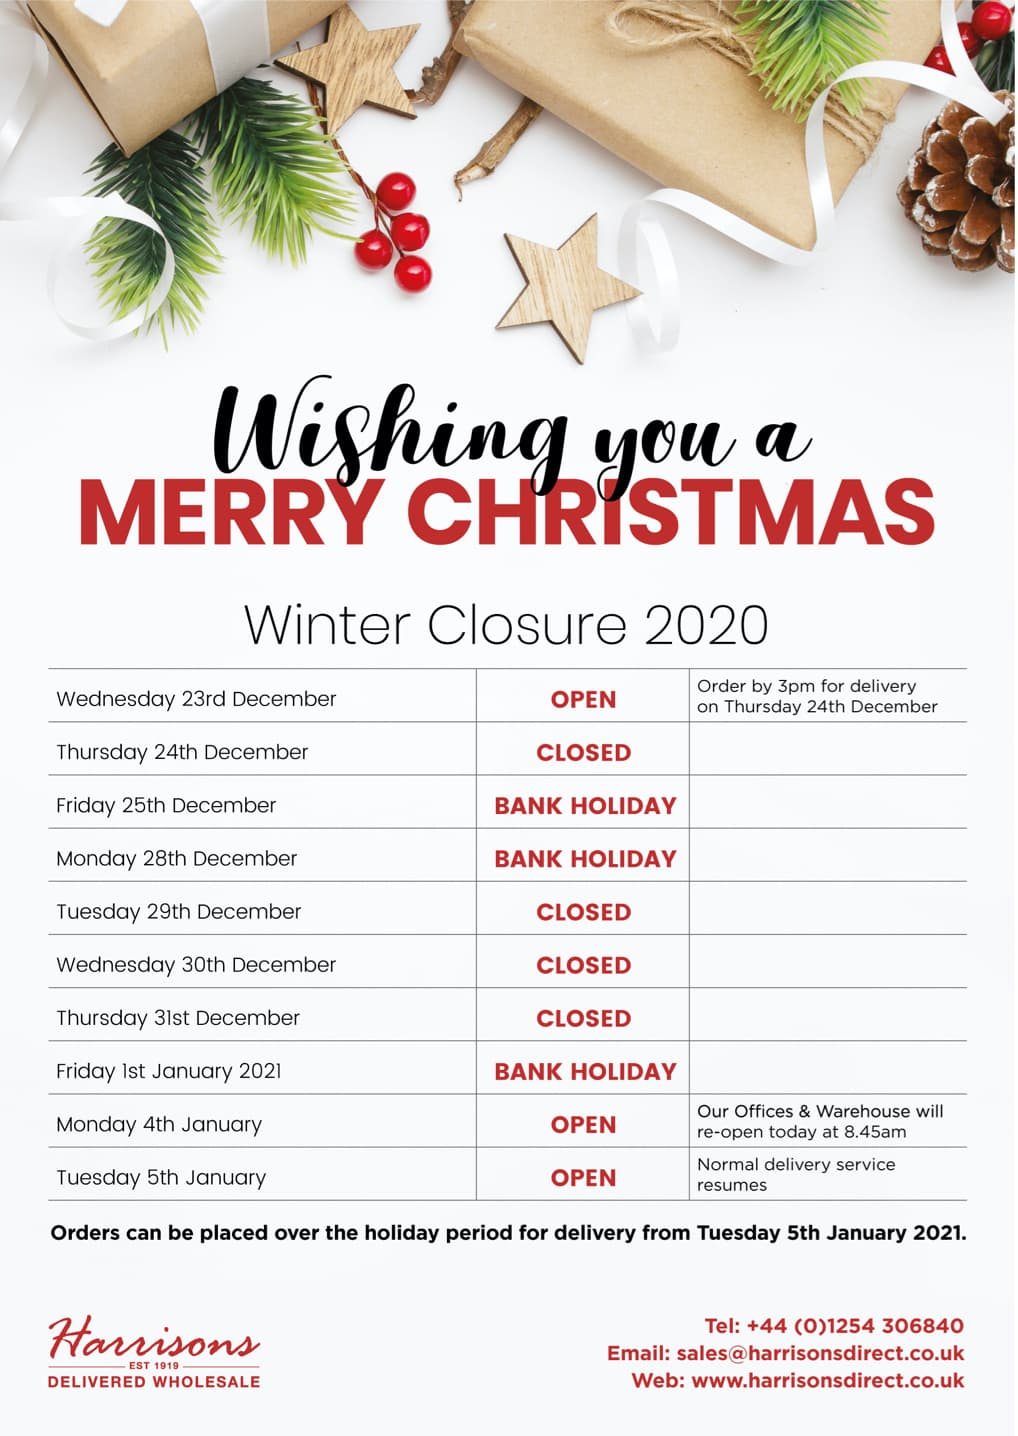 Harrisons Christmas Opening Times 2020